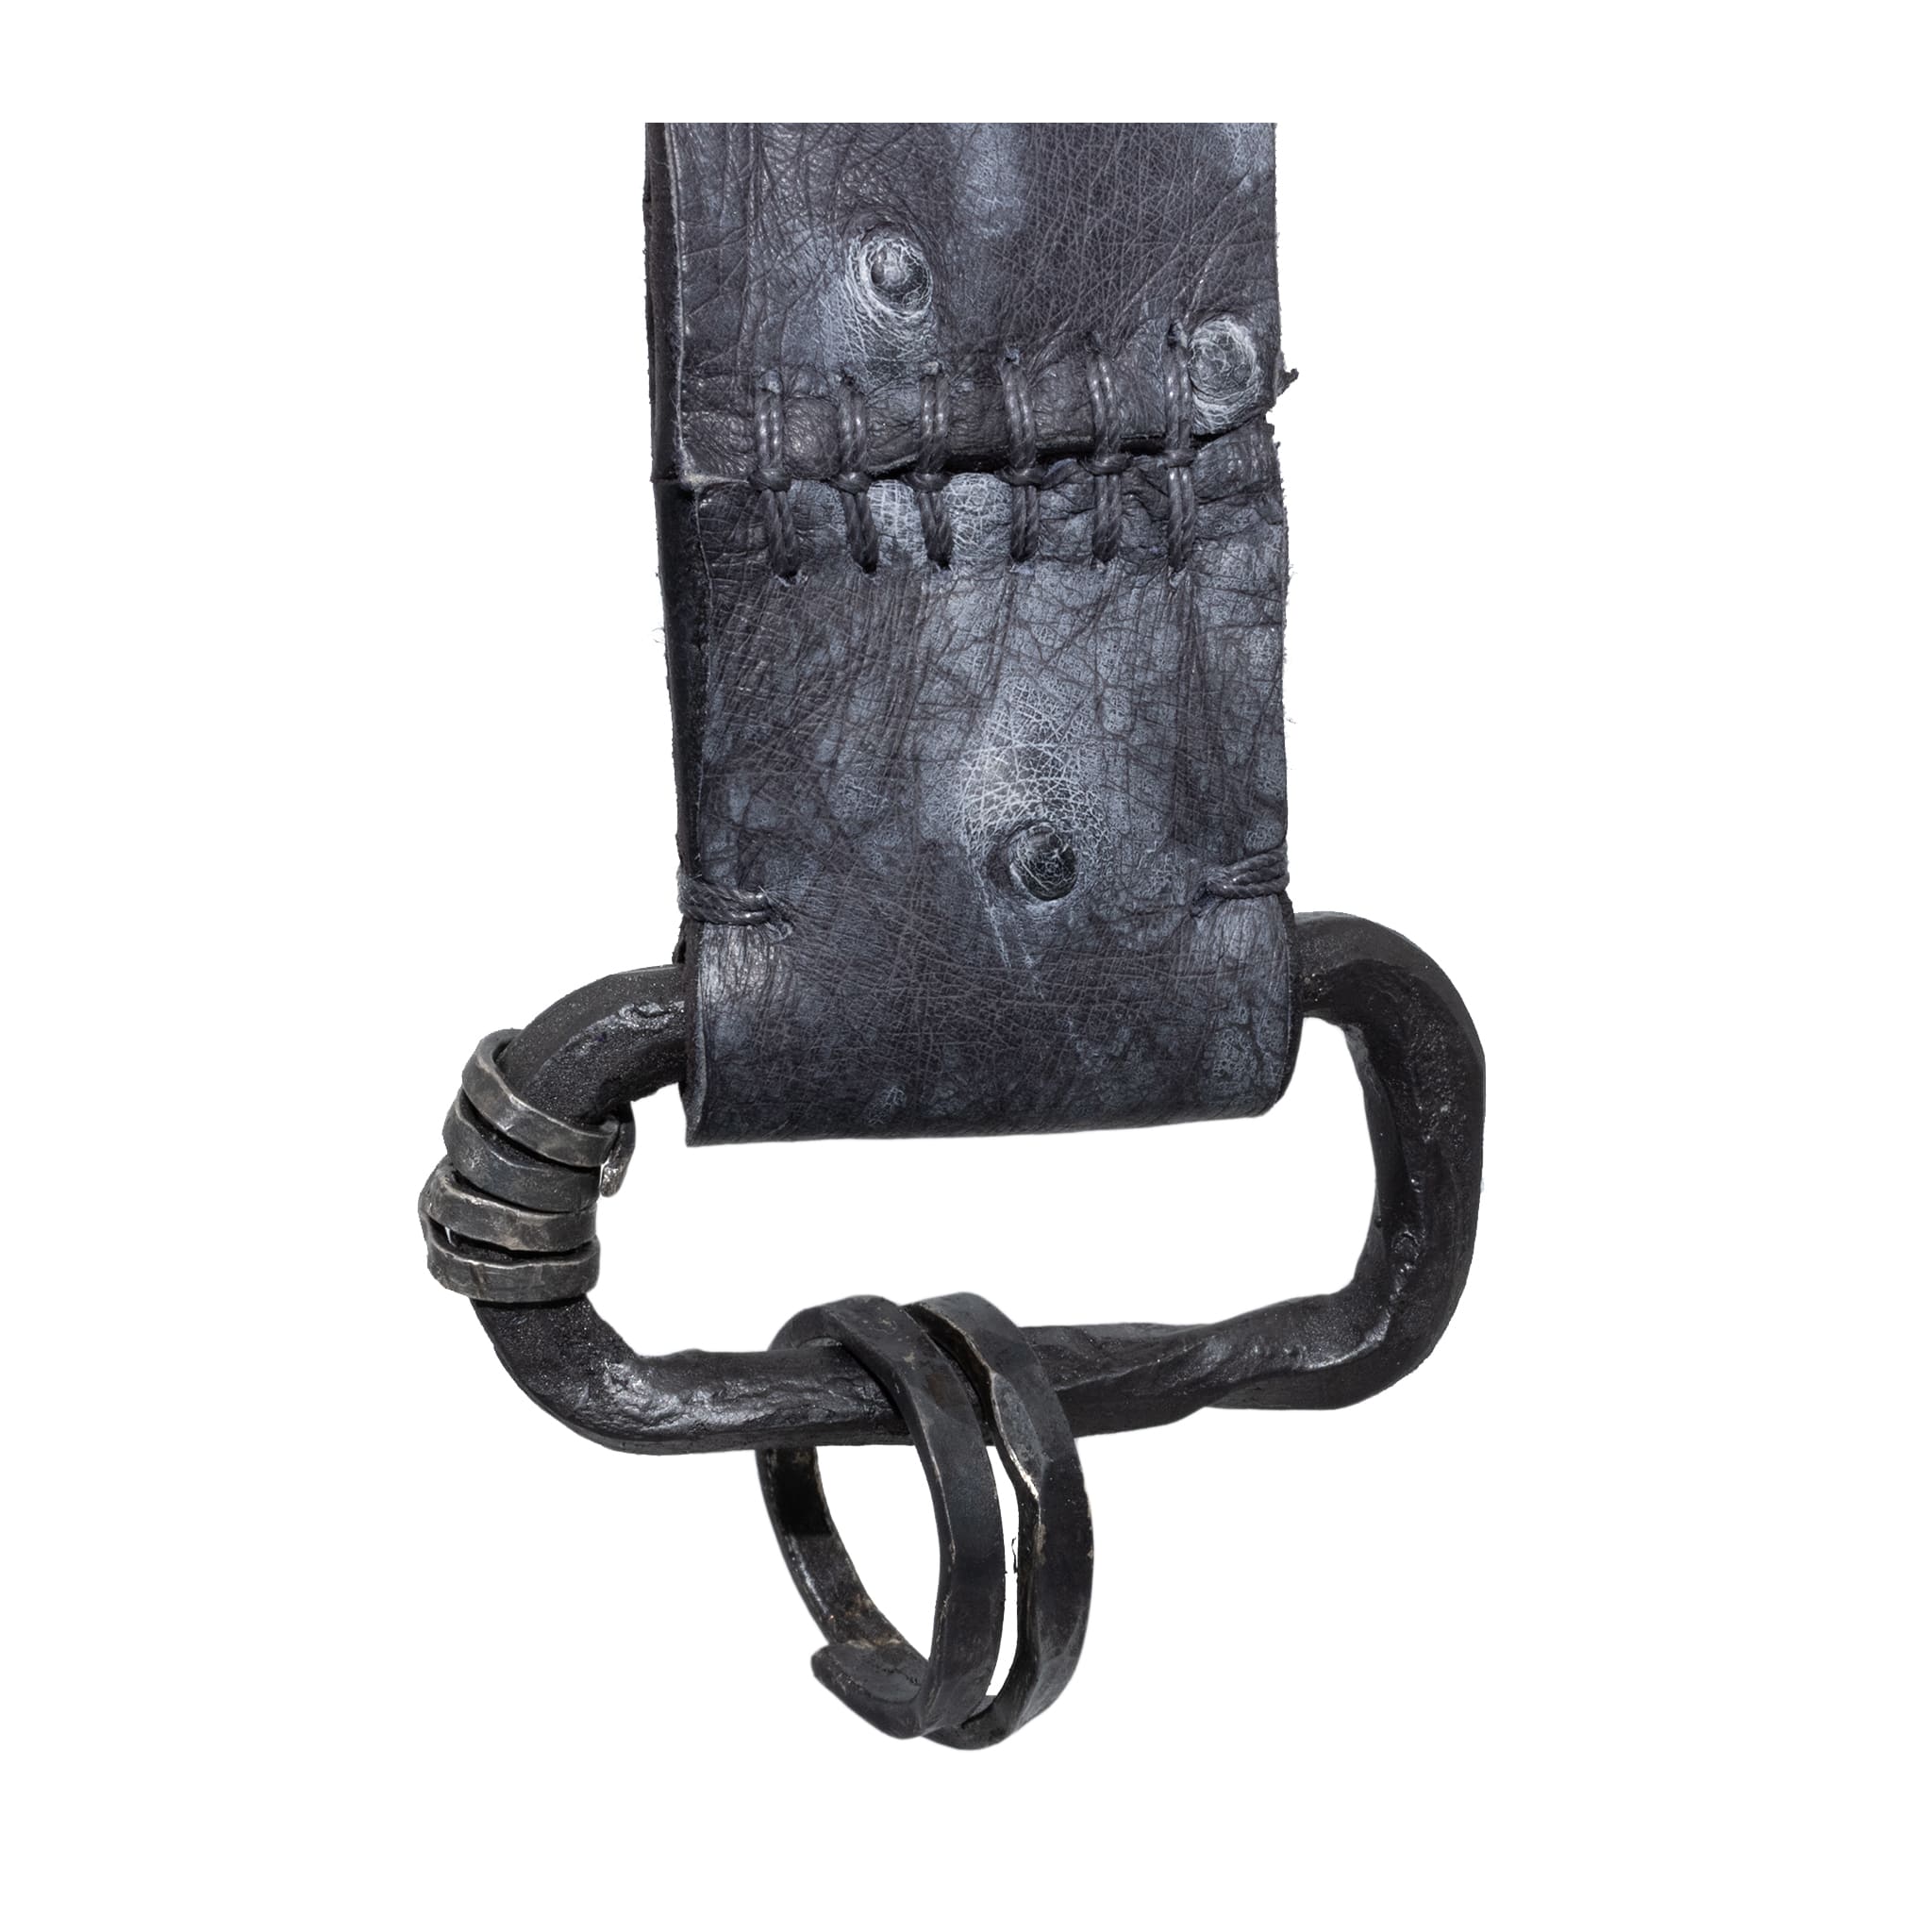 ostrich leather utility keychain with hand forged iron hardware and slow oxidised .925 sterling silver details, completely handmade in the UK by atelier SKN